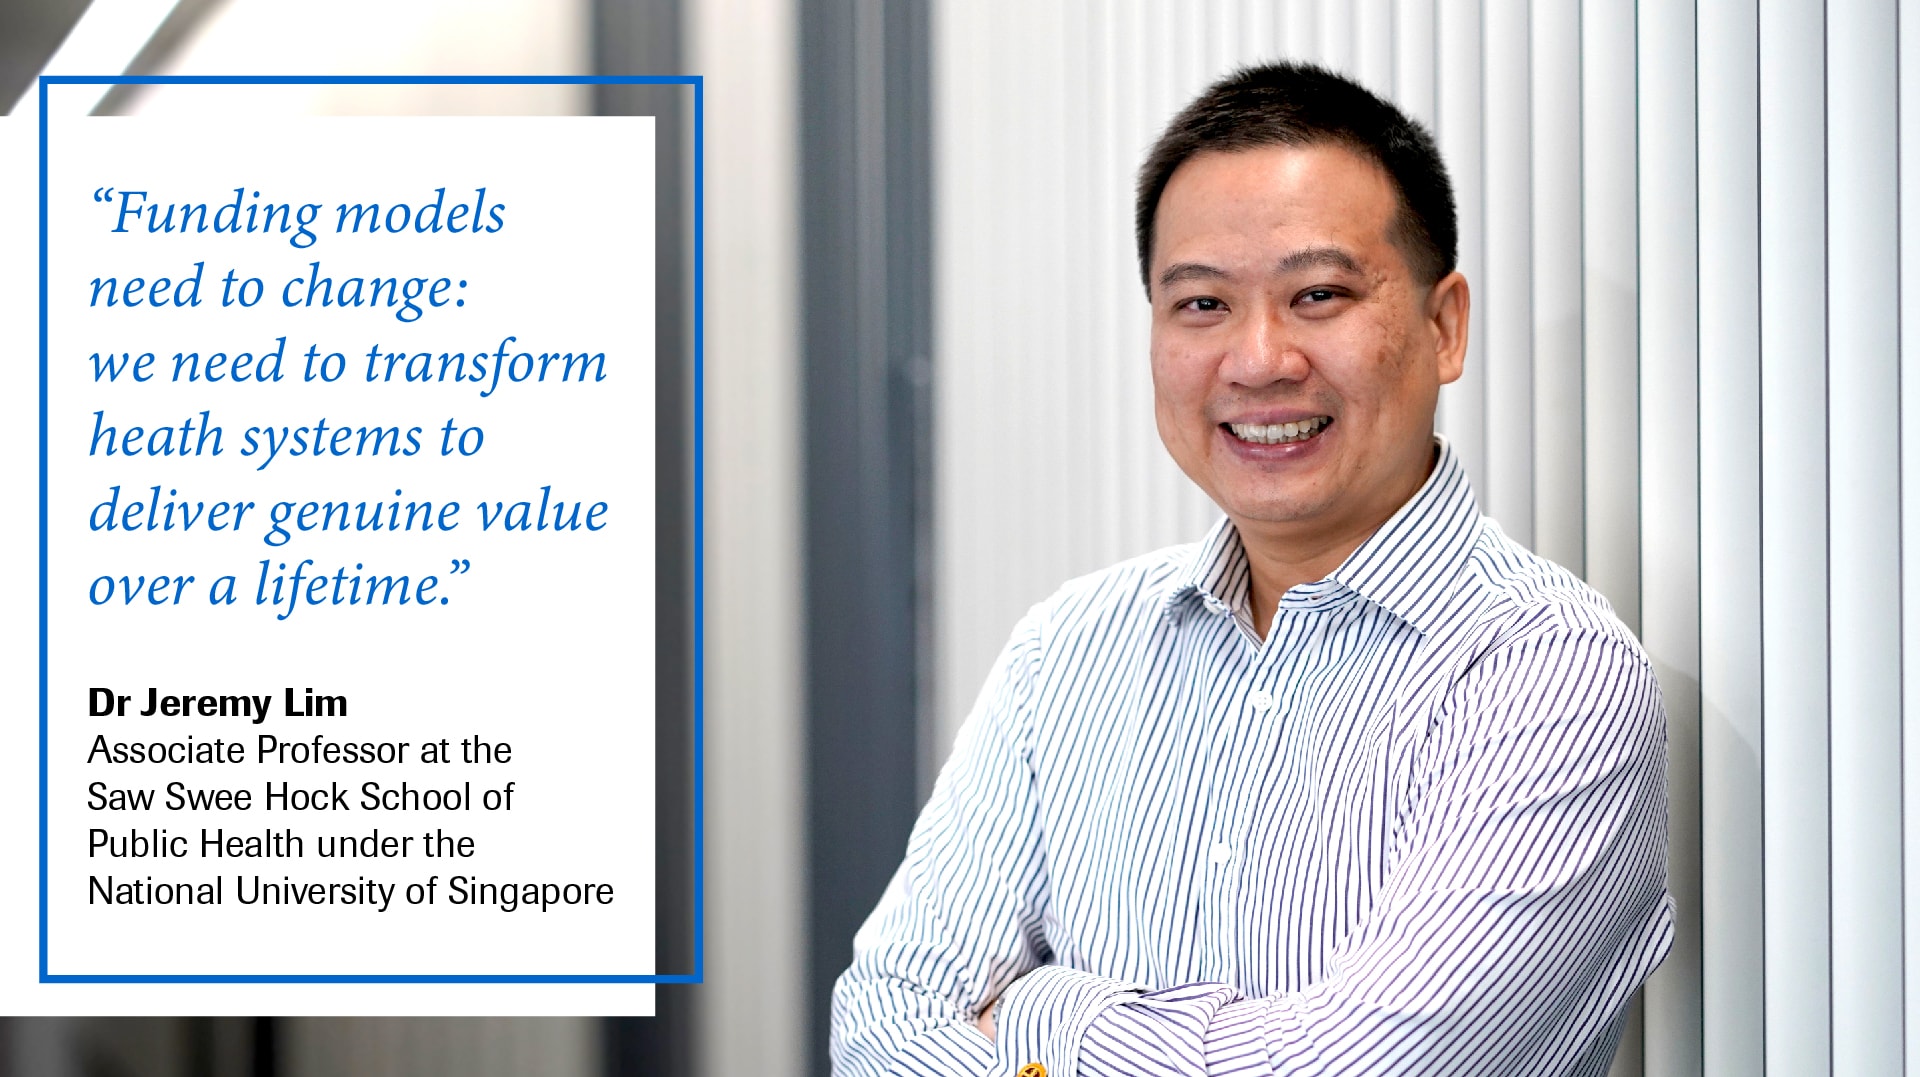 A quote from Dr Jeremy Lim, Associate Professor at the Saw Swee Hock School of Public Health under the National University of Singapore